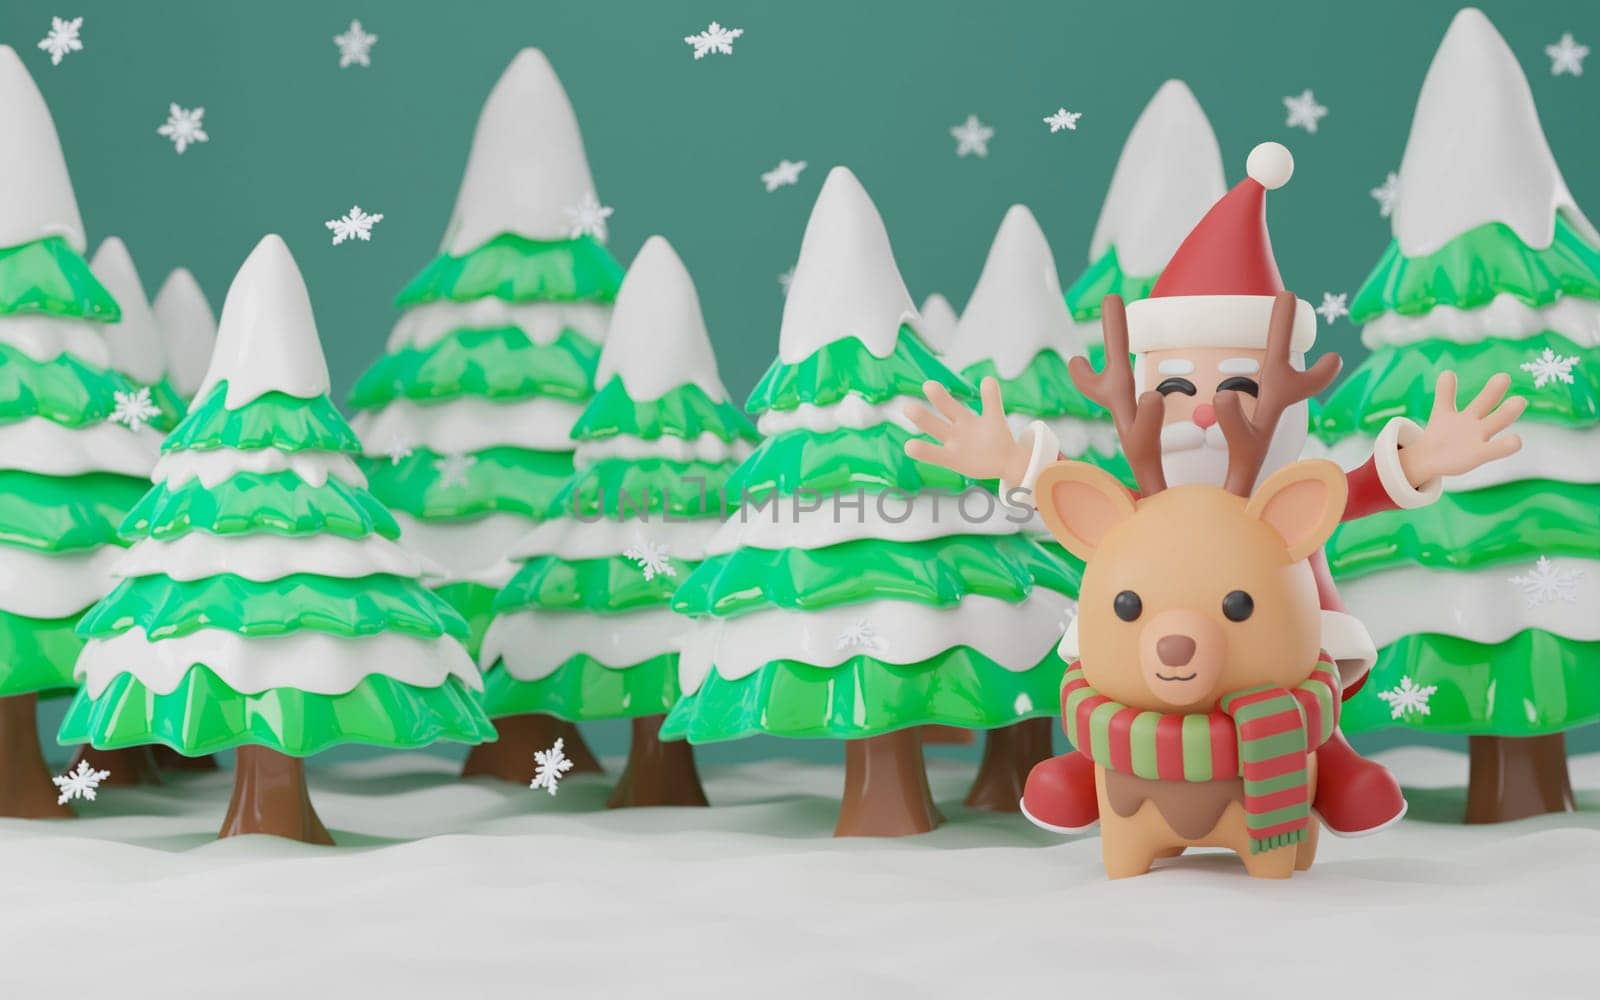 3D Christmas characters. Cute Santa Claus and reindeer render, trees with snow, . New Year winter banner. three dimensional illustration in plastic style. by meepiangraphic